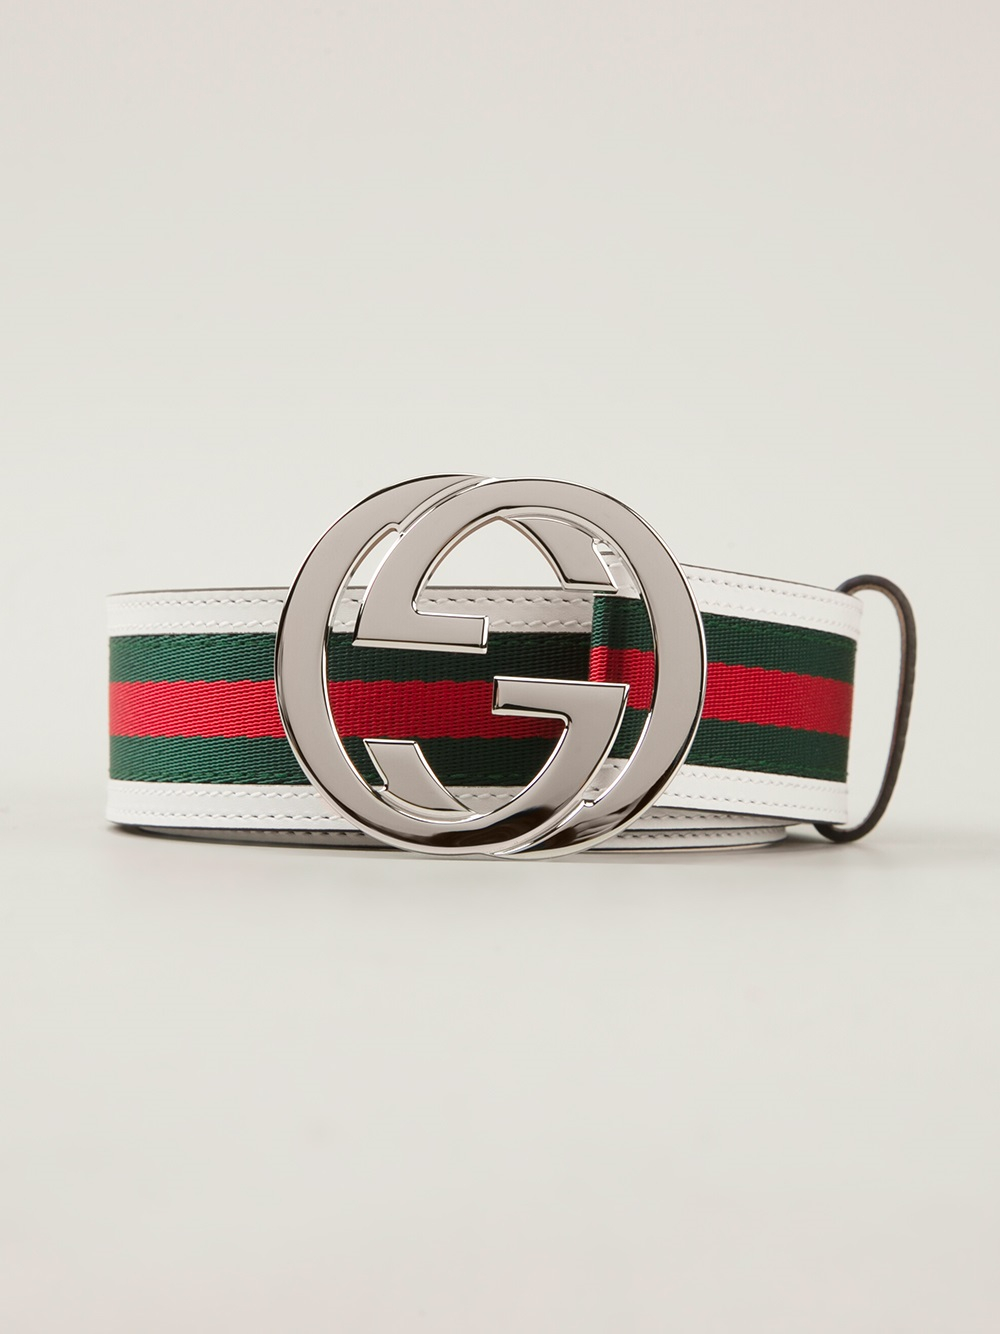 Gucci Striped Belt in White for Men - Lyst